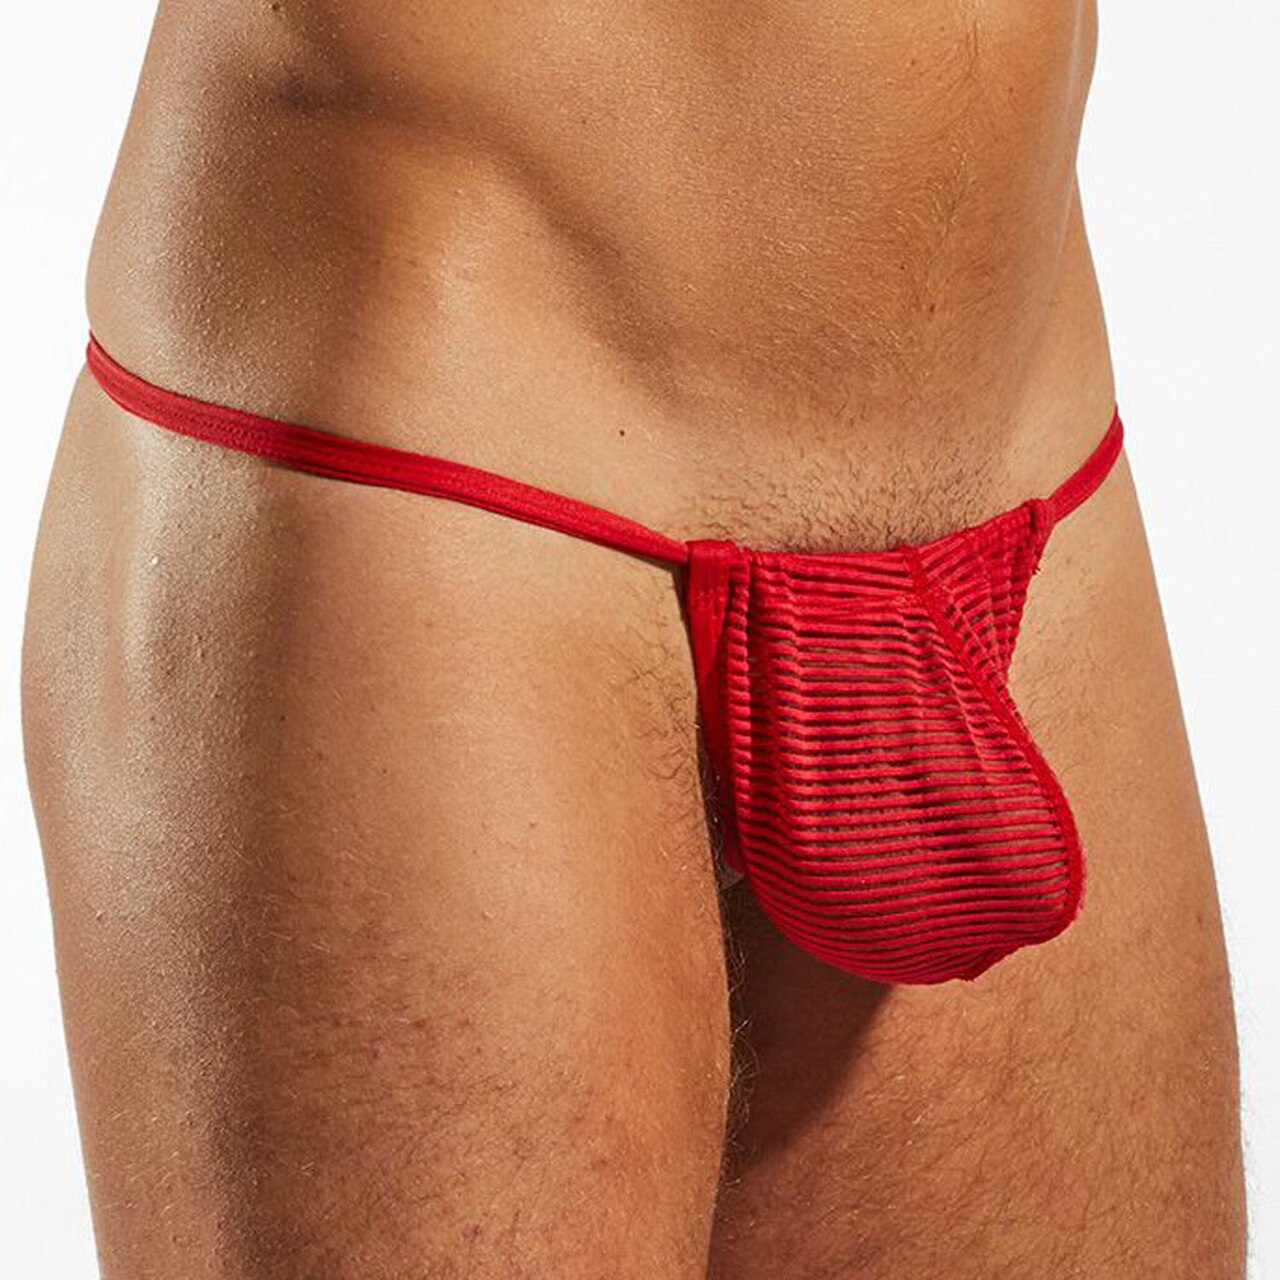 Mens Cocksox Sheer Multi Striped Slingshot Pouch G string Cupid Red